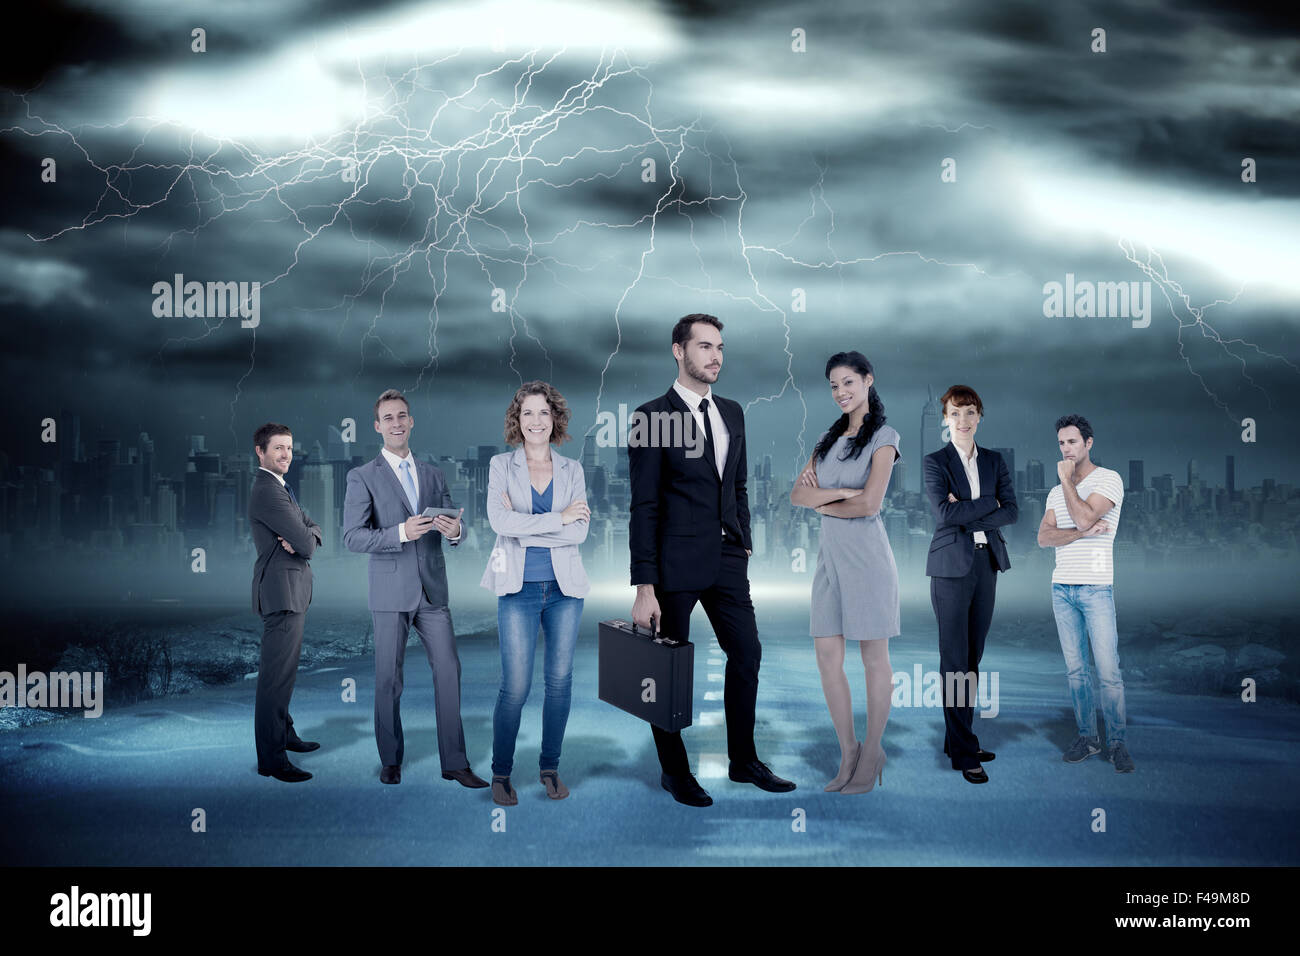 Composite image of business team Stock Photo